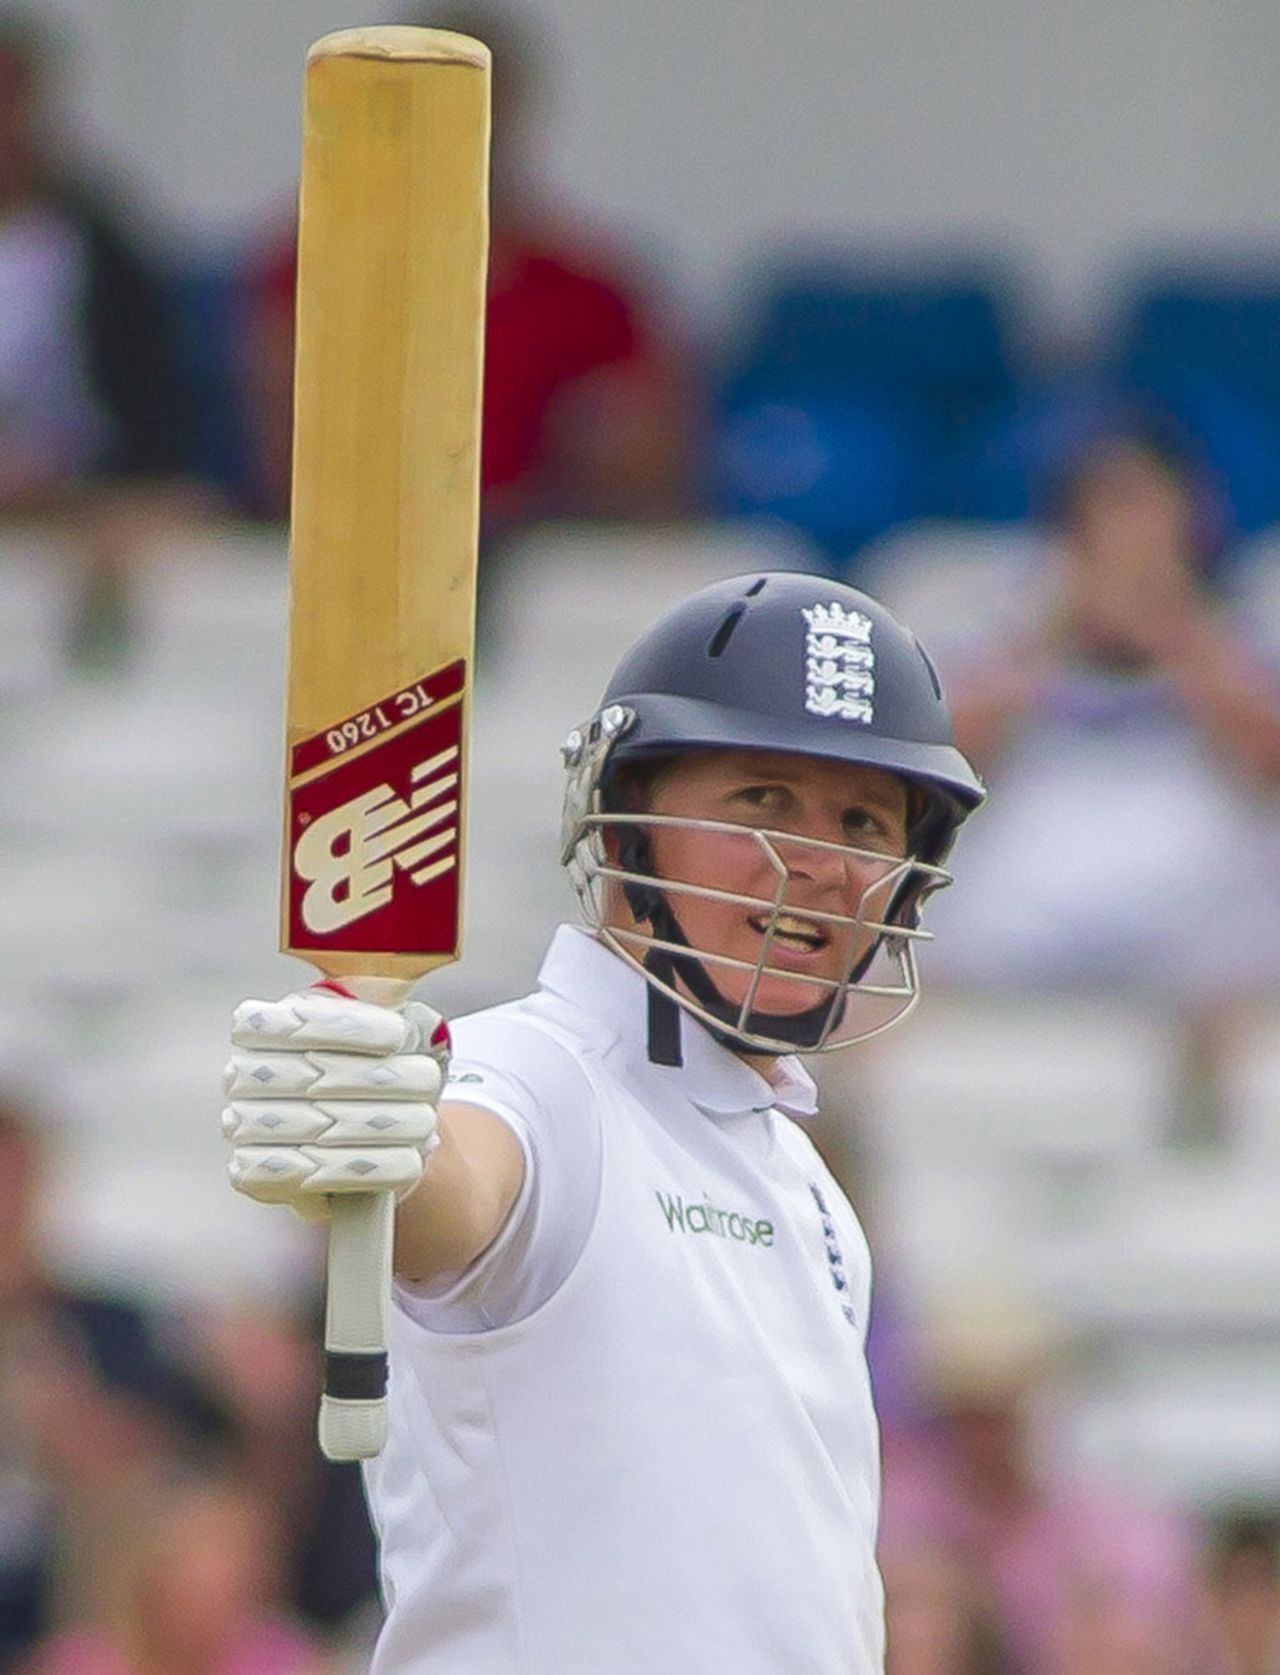 Gary Ballance passed 50 for the second innings in succession, England v Sri Lanka, 2nd Investec Test, Headingley, 2nd day, June 21, 2014